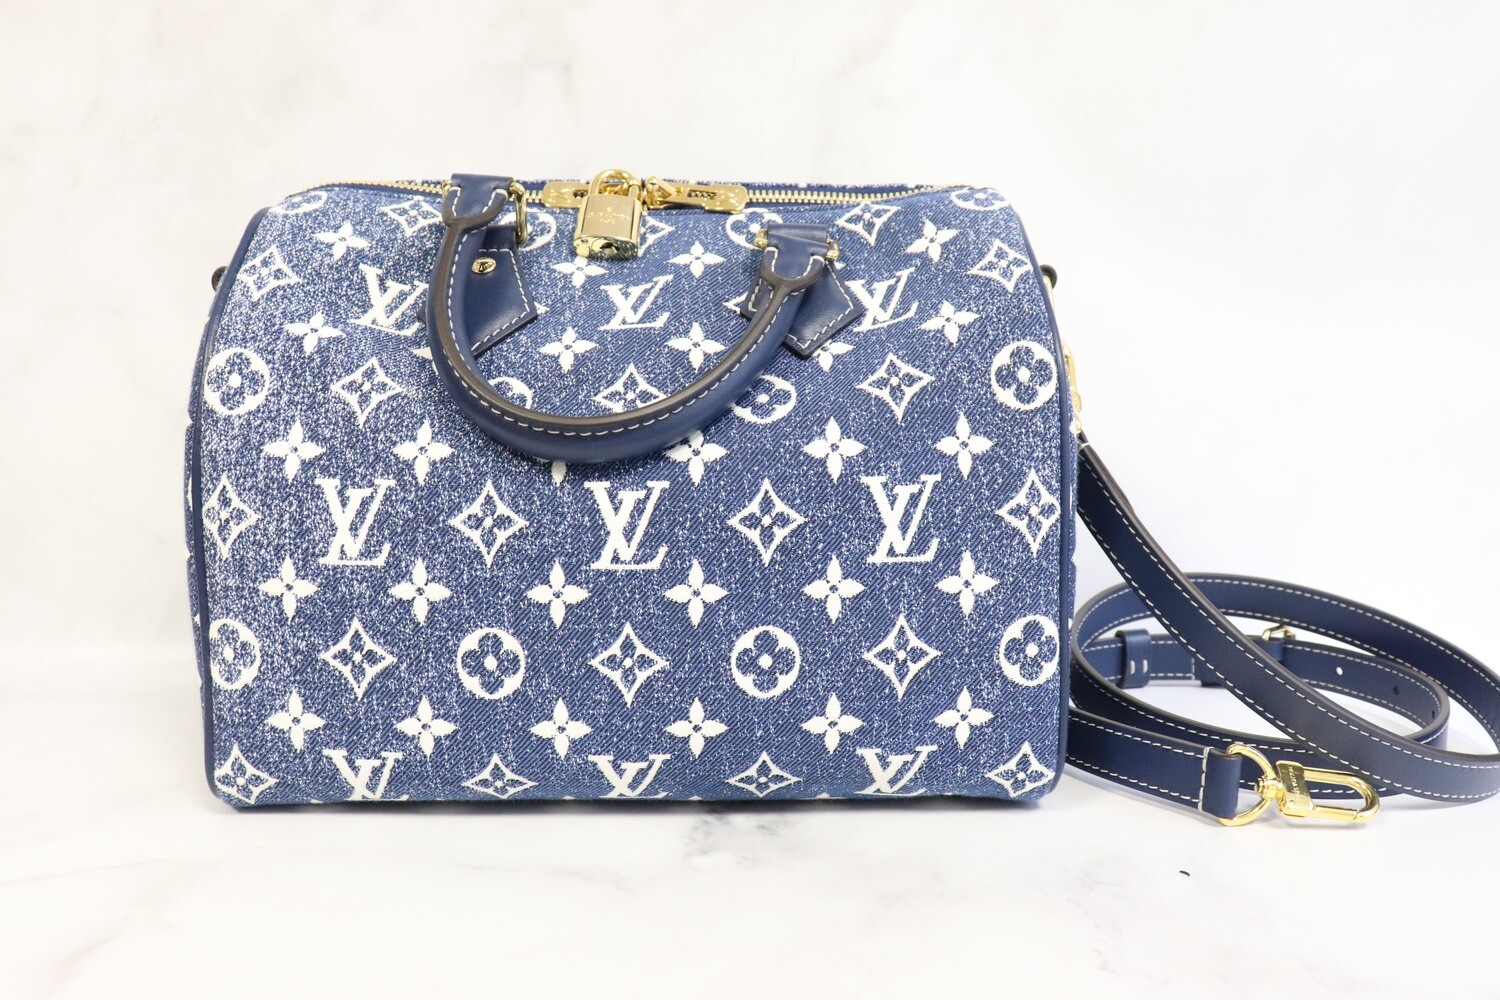 New in Box Louis Vuitton Denim on The Go Bag